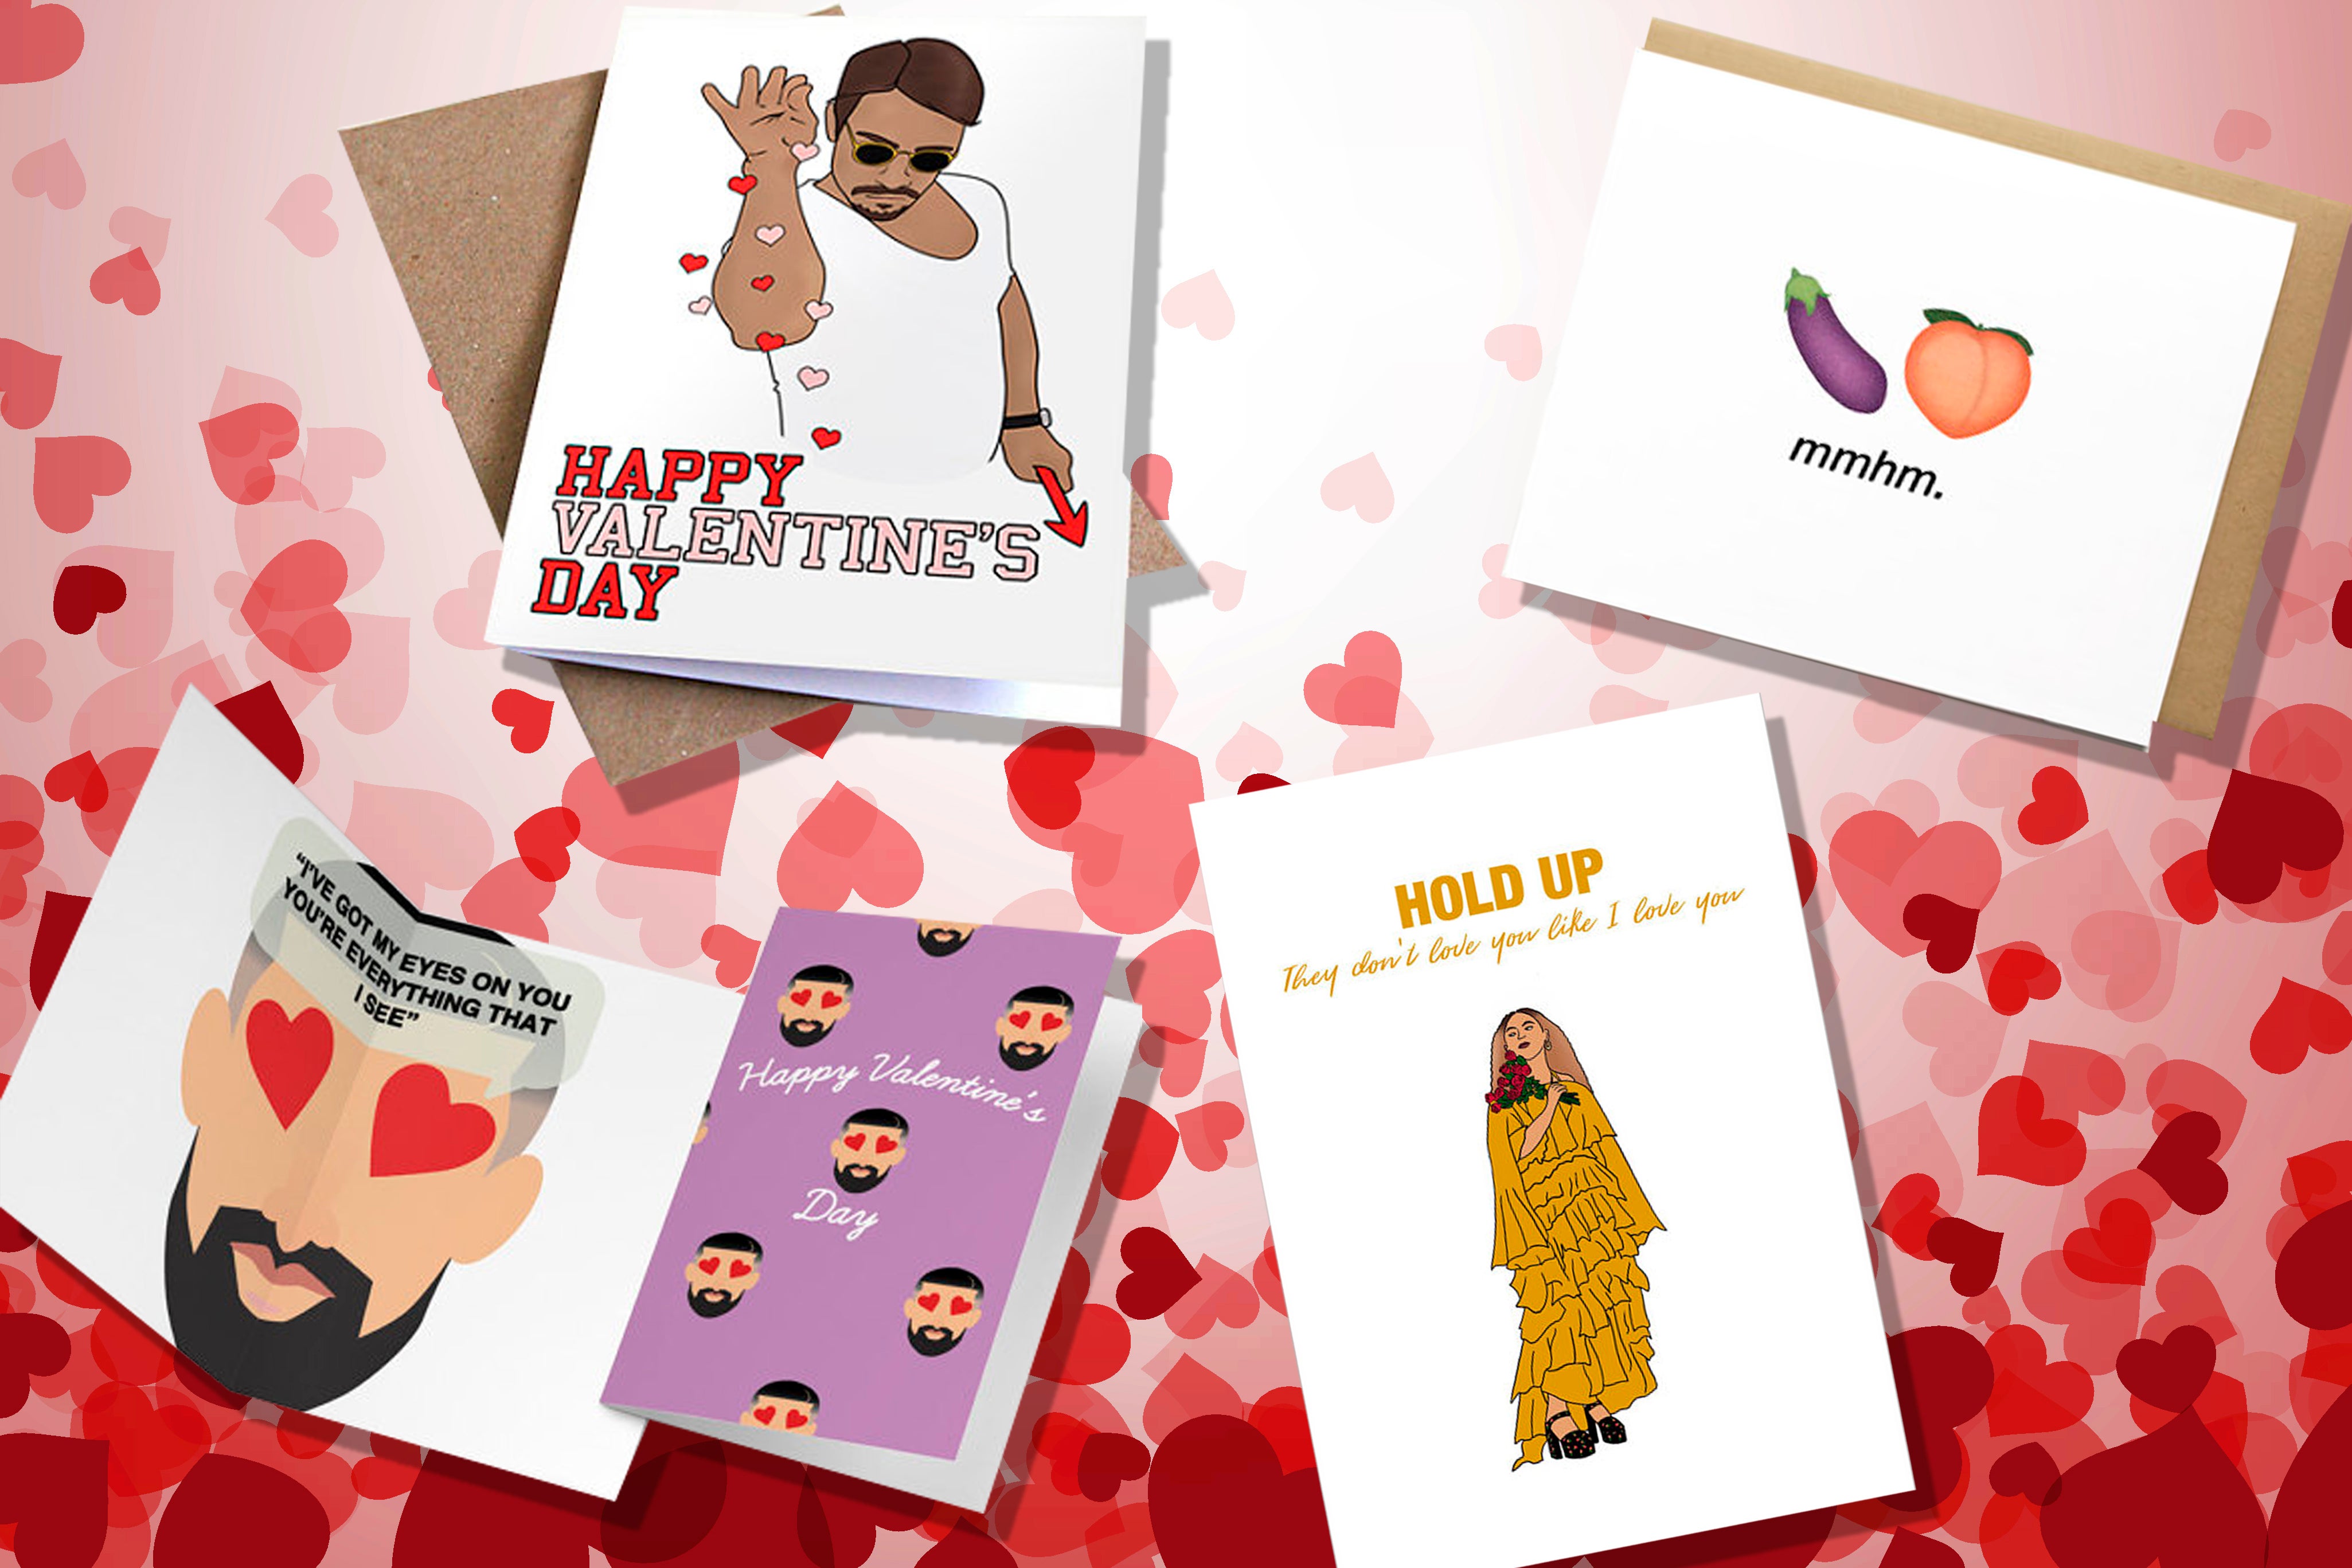 20 Valentine's Day Cards That Say It All
